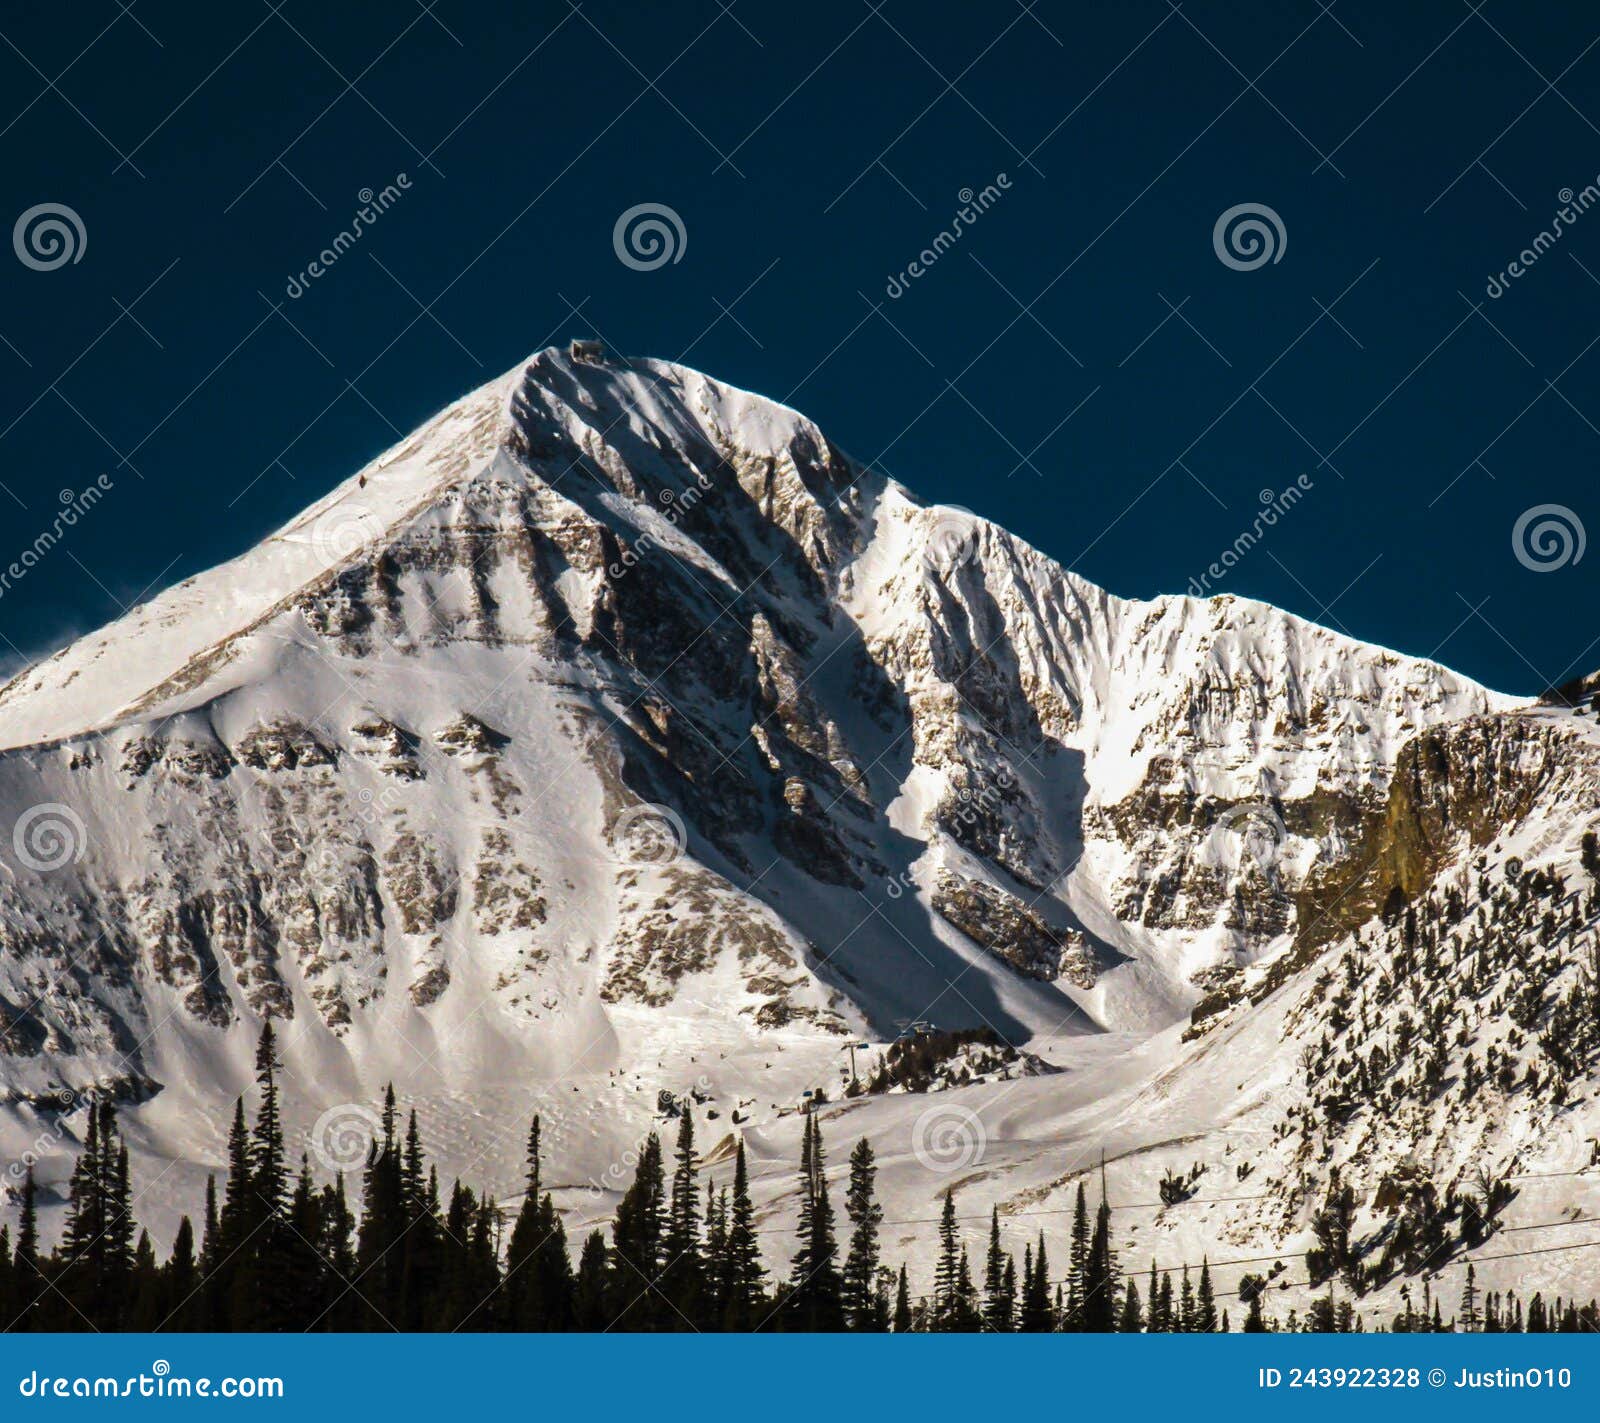 mountain peak in montana on clear day